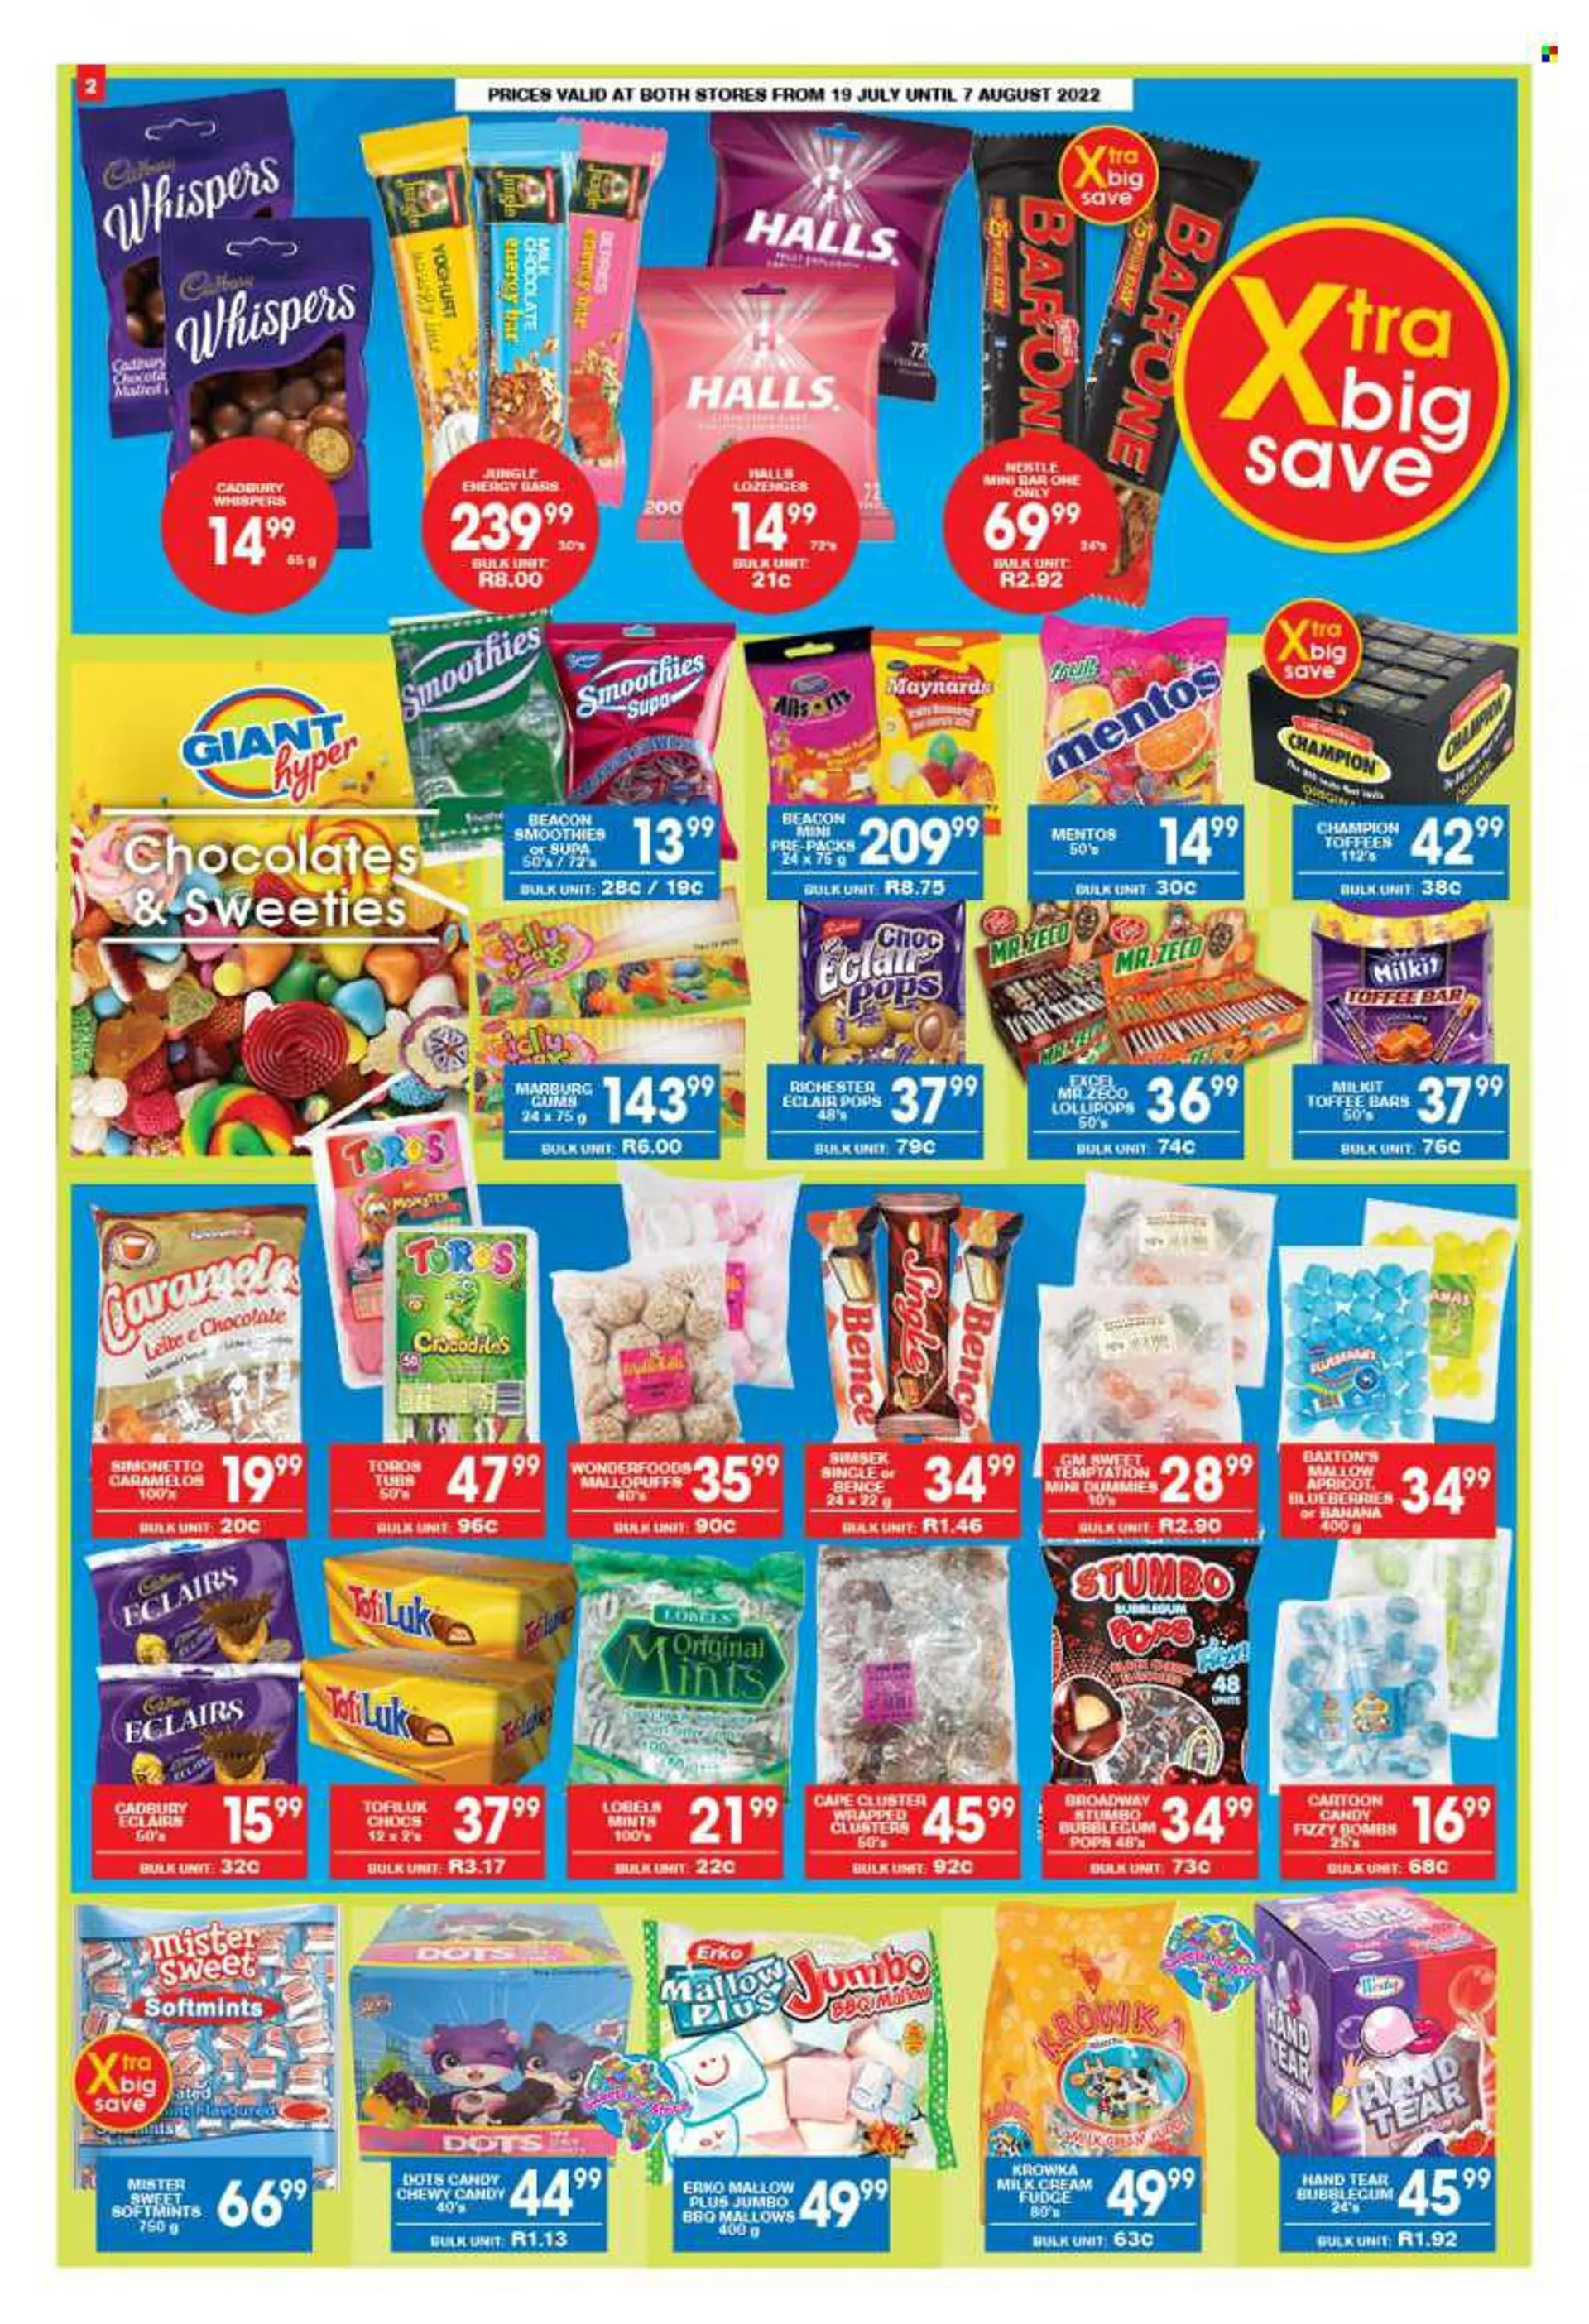 Giant Hyper catalogue  - 19/07/2022 - 07/08/2022 - Sales products - blueberries, yoghurt, milk, Fudge, marshmallows, Nestlé, Halls, chocolate, Mentos, Toffees, toffee, jelly, bubblegum, lollipop, Cadbury, energy bars, Monster, smoothie, LOr. Page 2.